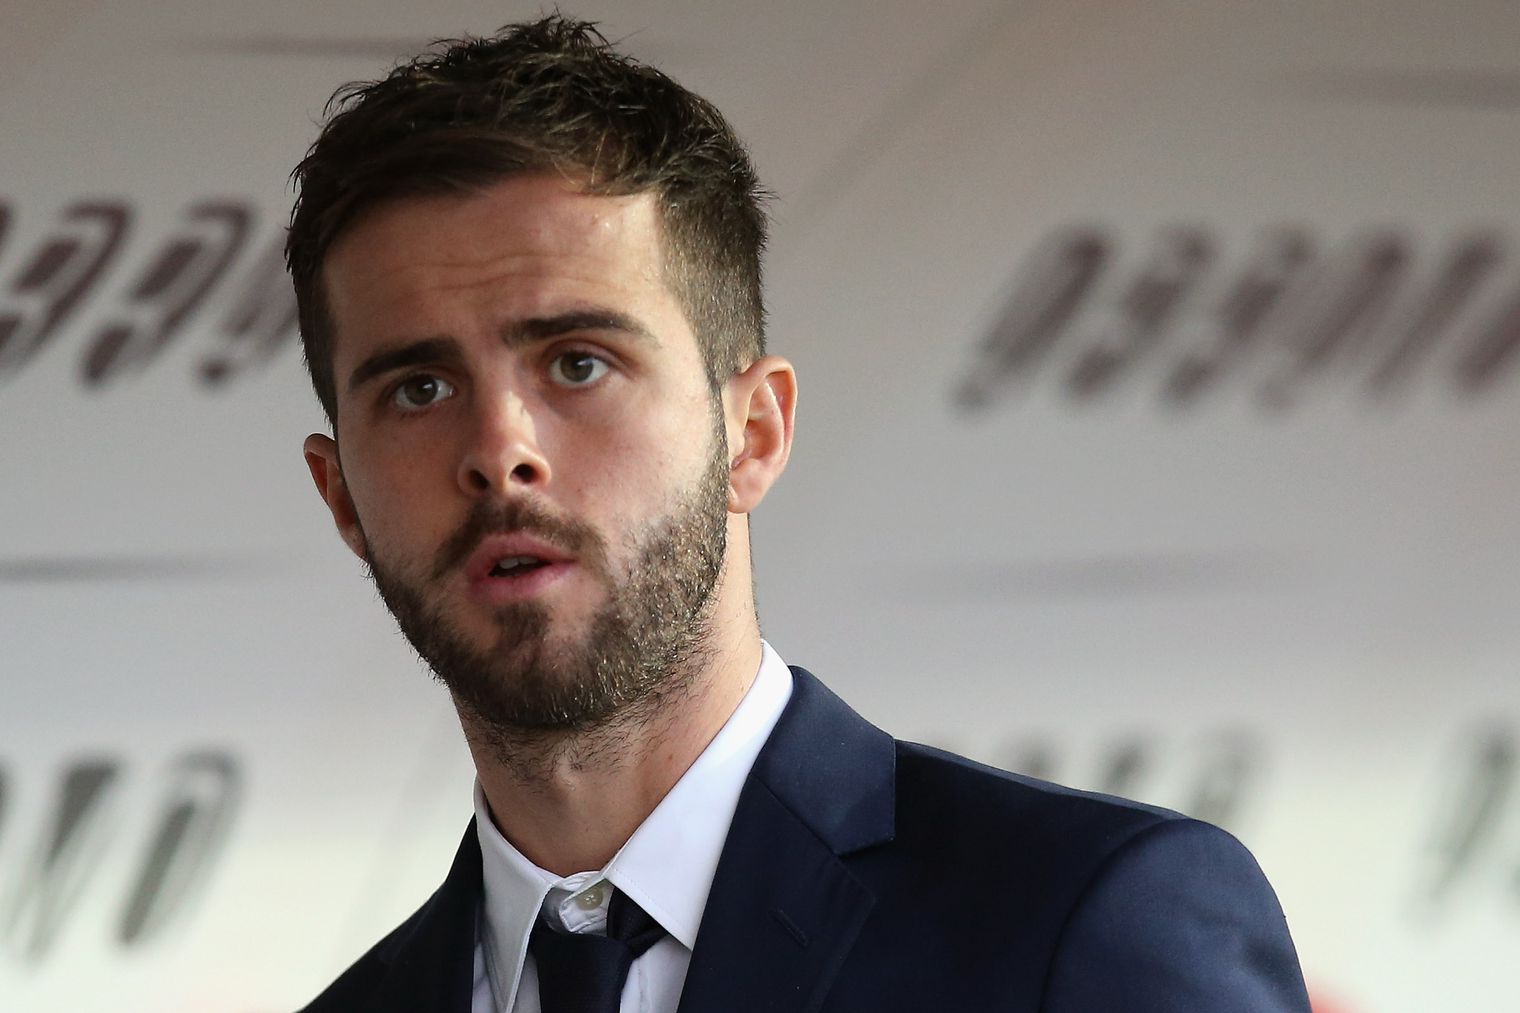 Miralem Pjanic is not interested in moving to Manchester United